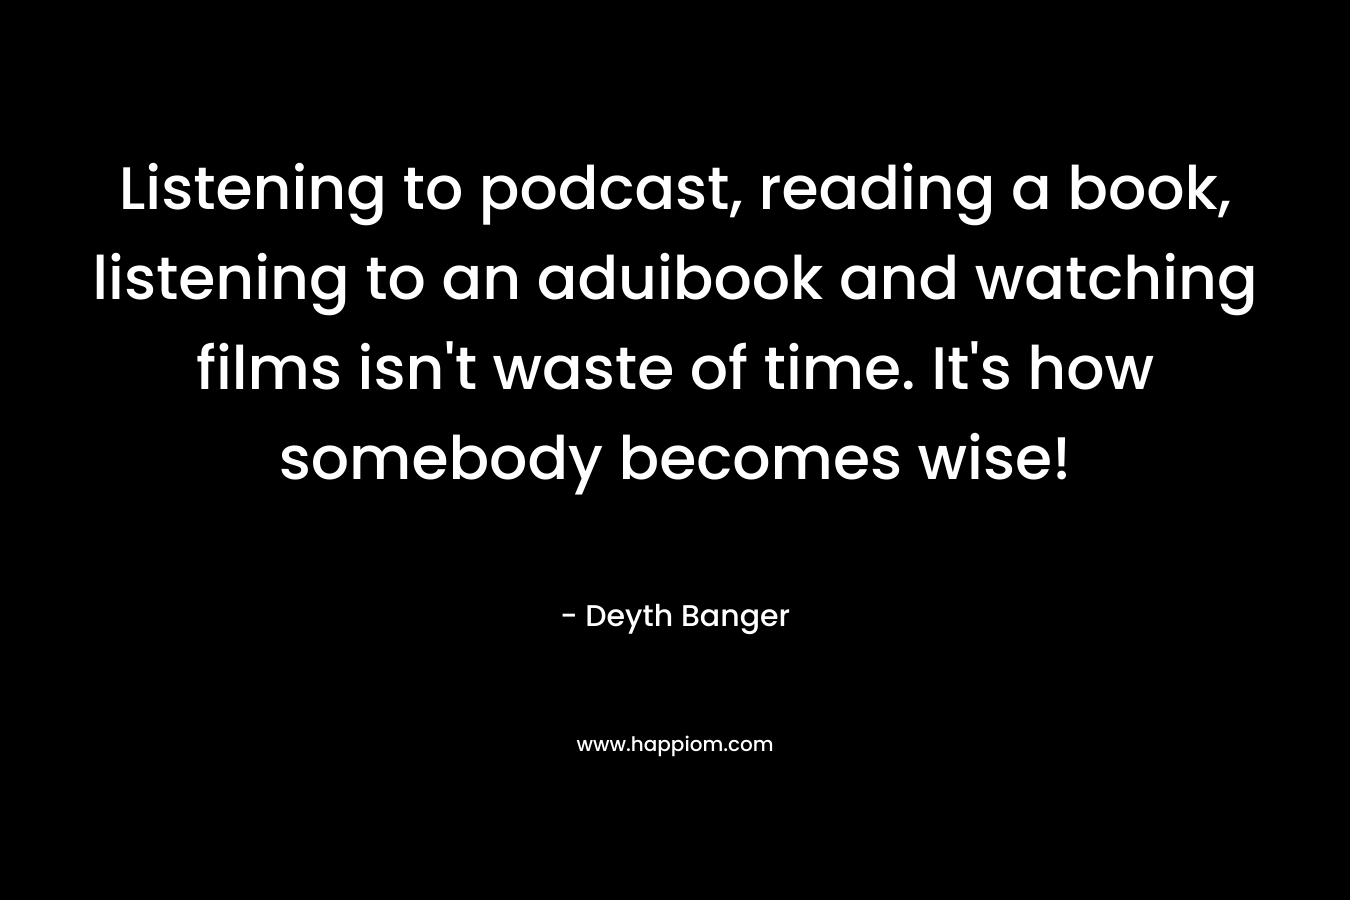 Listening to podcast, reading a book, listening to an aduibook and watching films isn't waste of time. It's how somebody becomes wise!